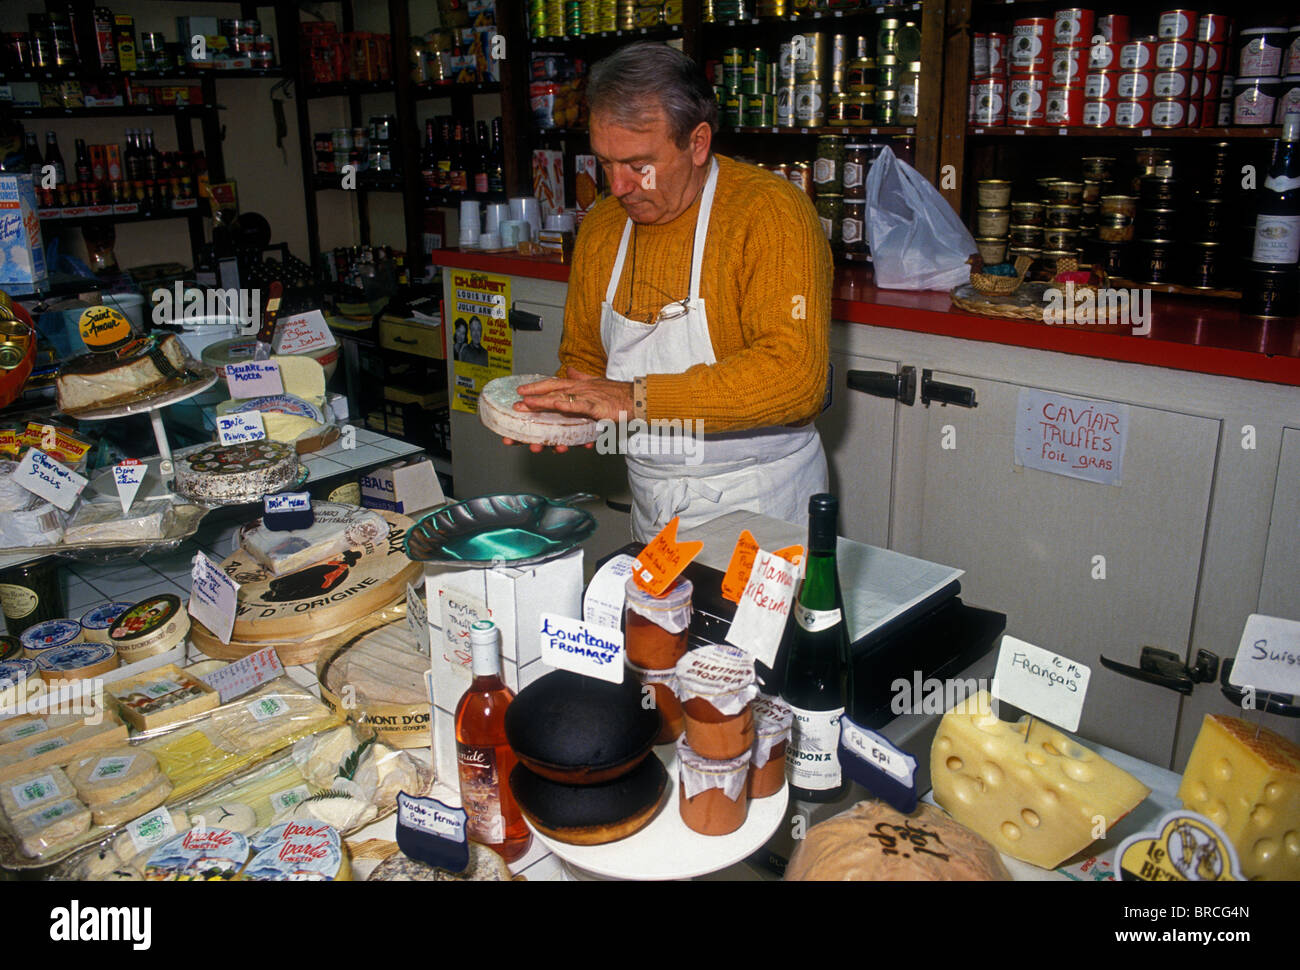 1, one, Frenchman, French man, cheese vendor, selling cheese, market, French Basque country, capital city, Bayonne, France, Europe Stock Photo